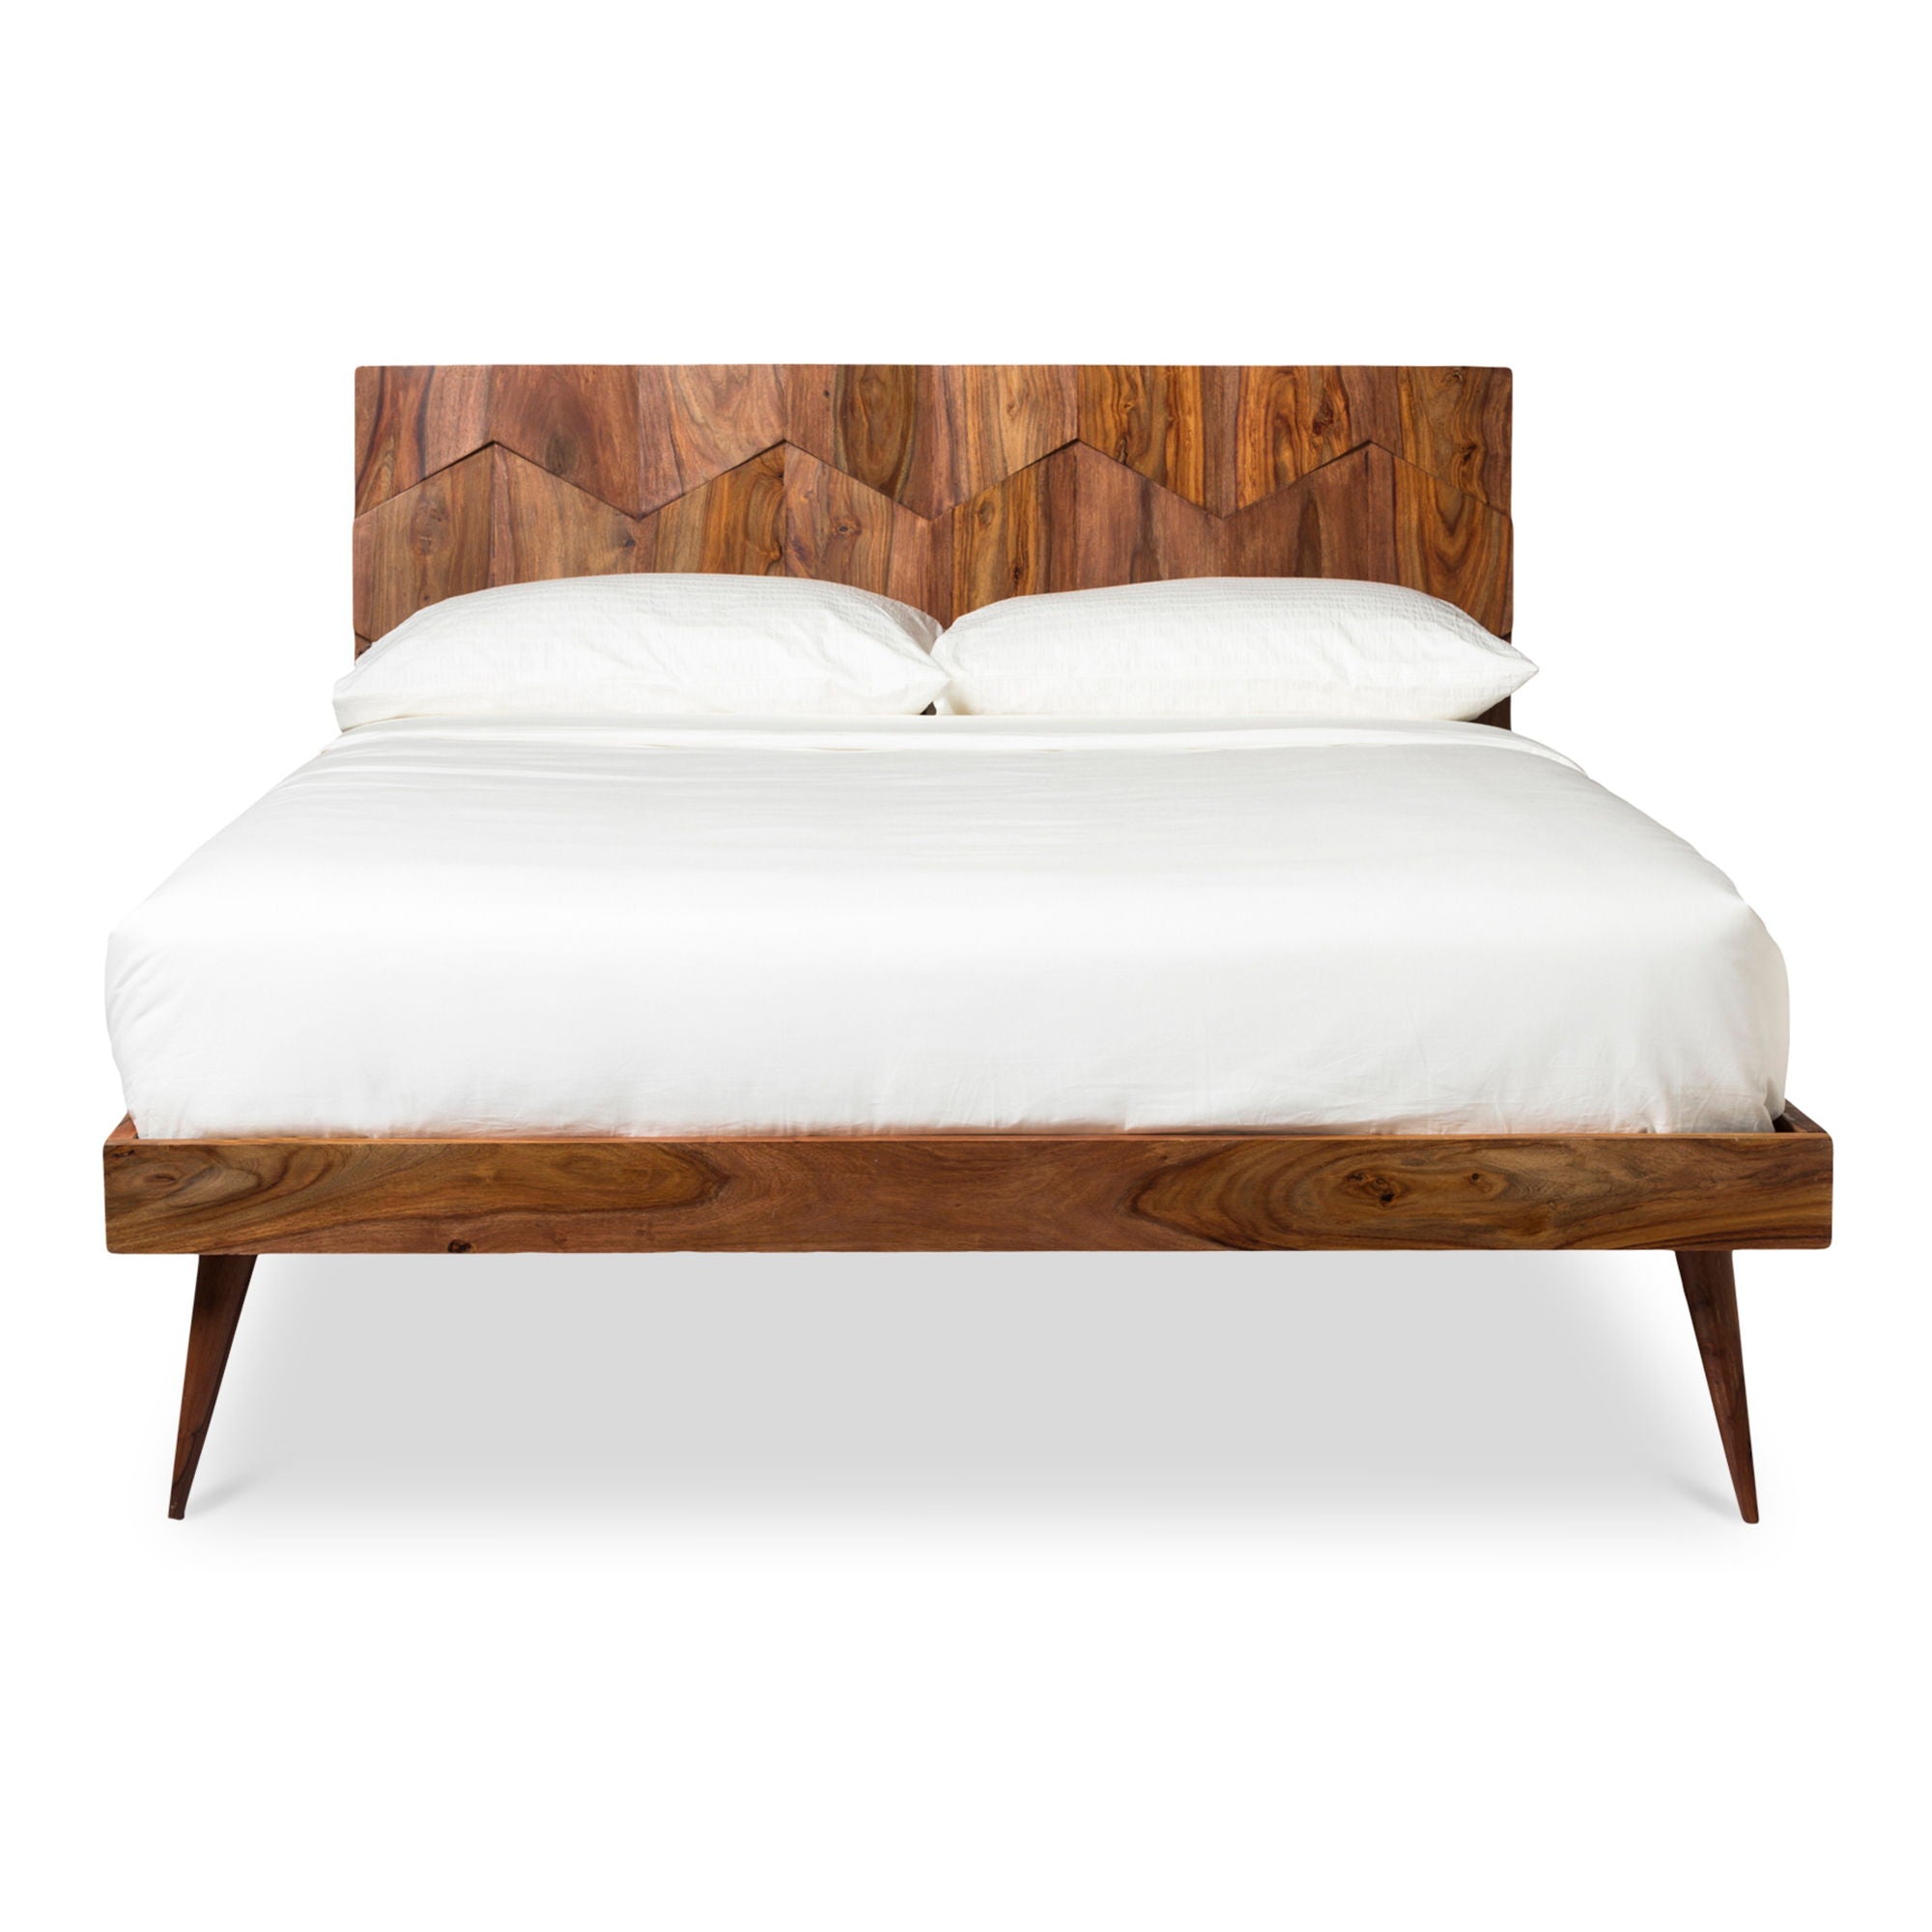 O2 - Queen Bed - Natural